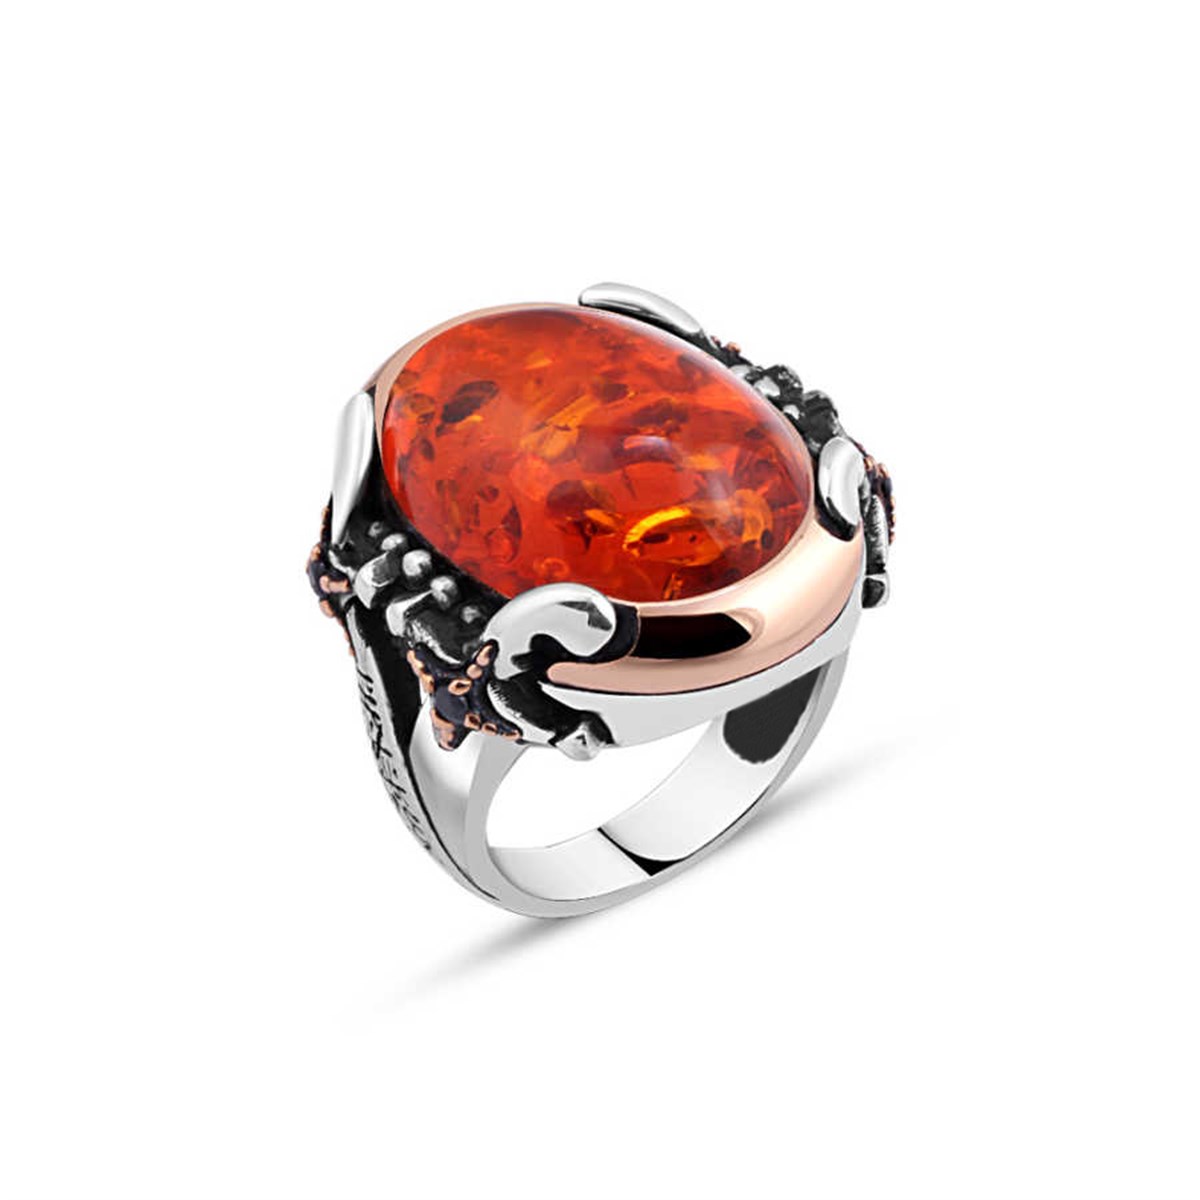 Hooded Synthetic Amber Edges Sword Sterling Silver Men's Ring